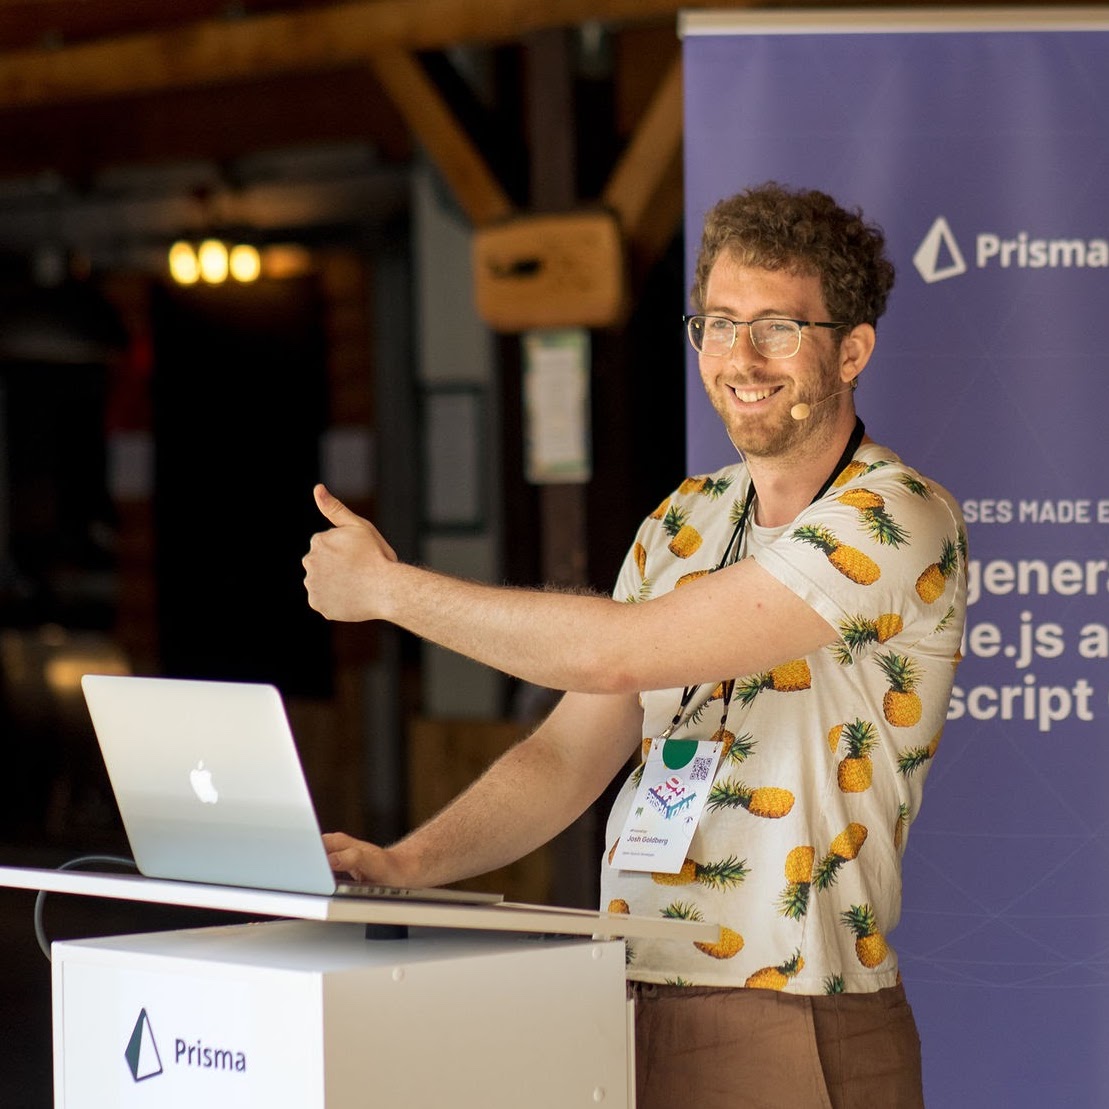 Me smiling and speaking at a conference podium, wearing a pineapples-on-white t-shirt, giving a thumbs up